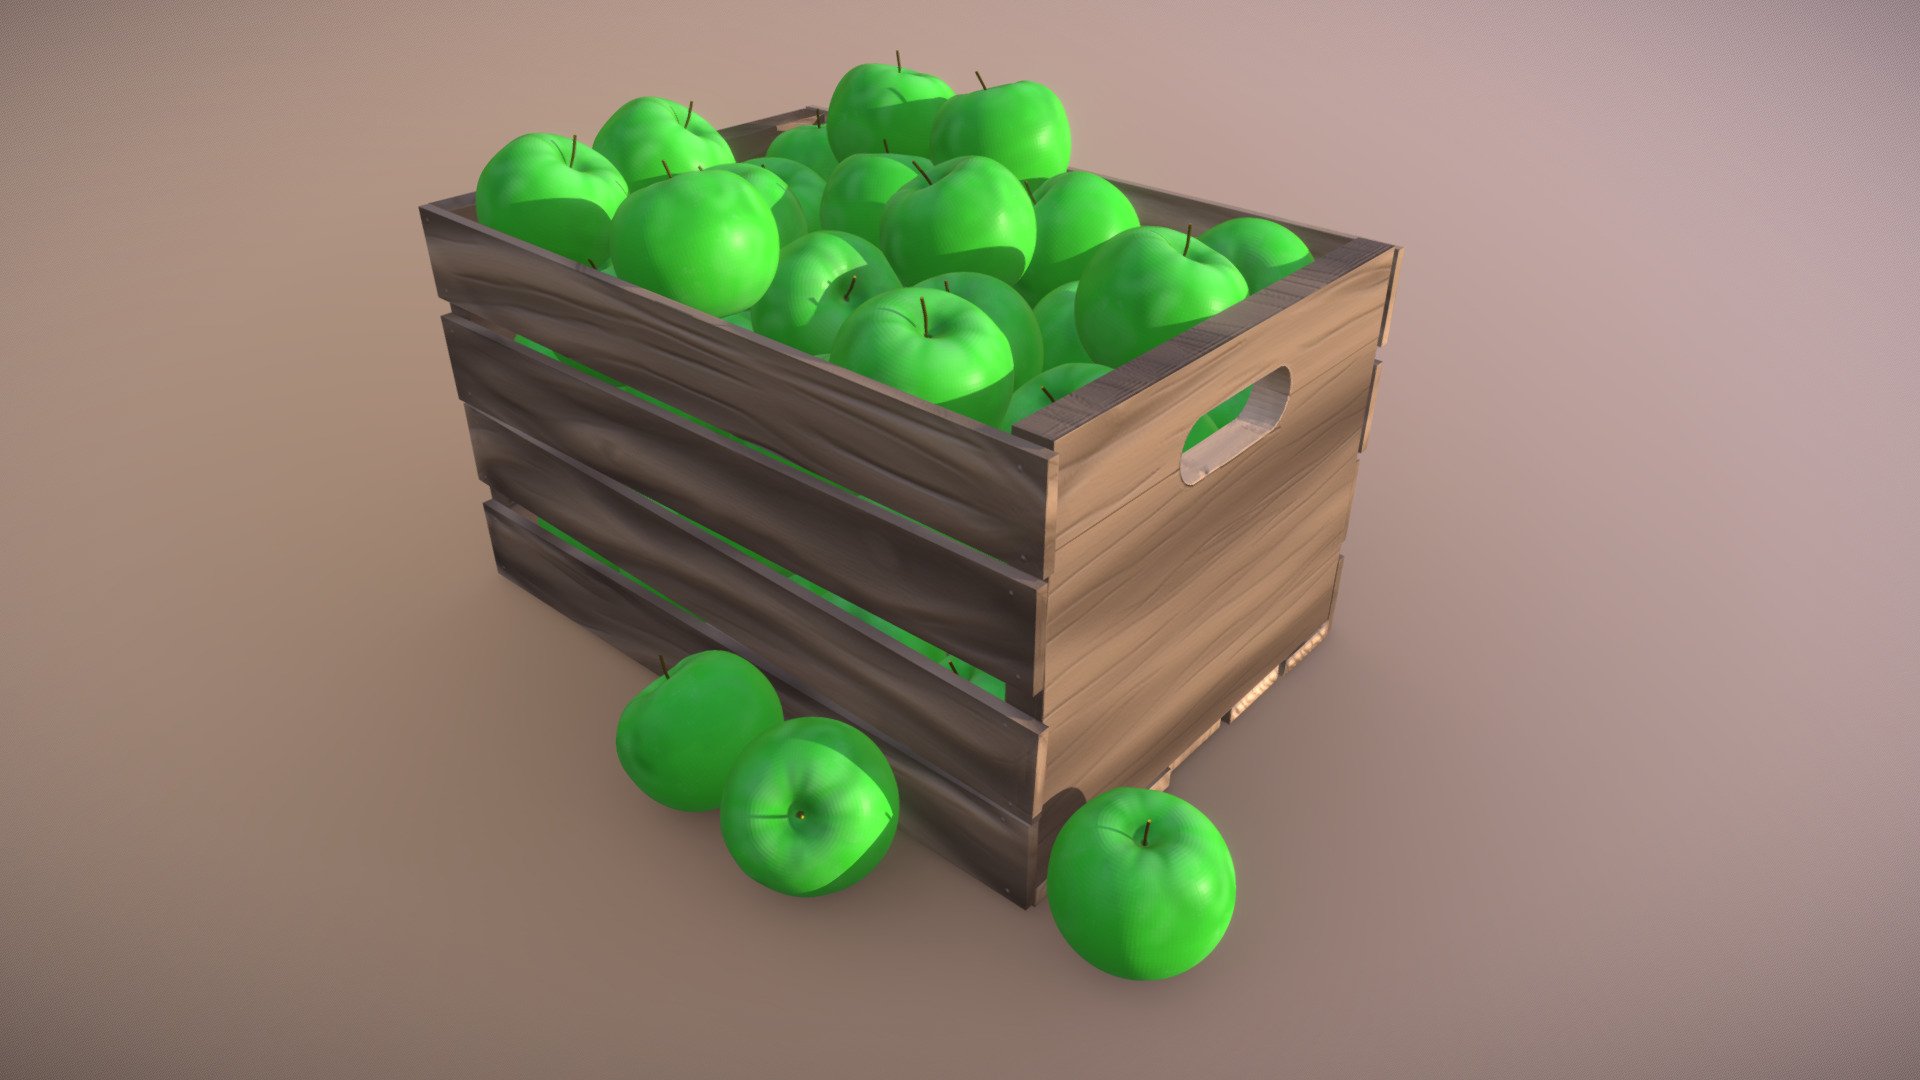 Crate of Apples